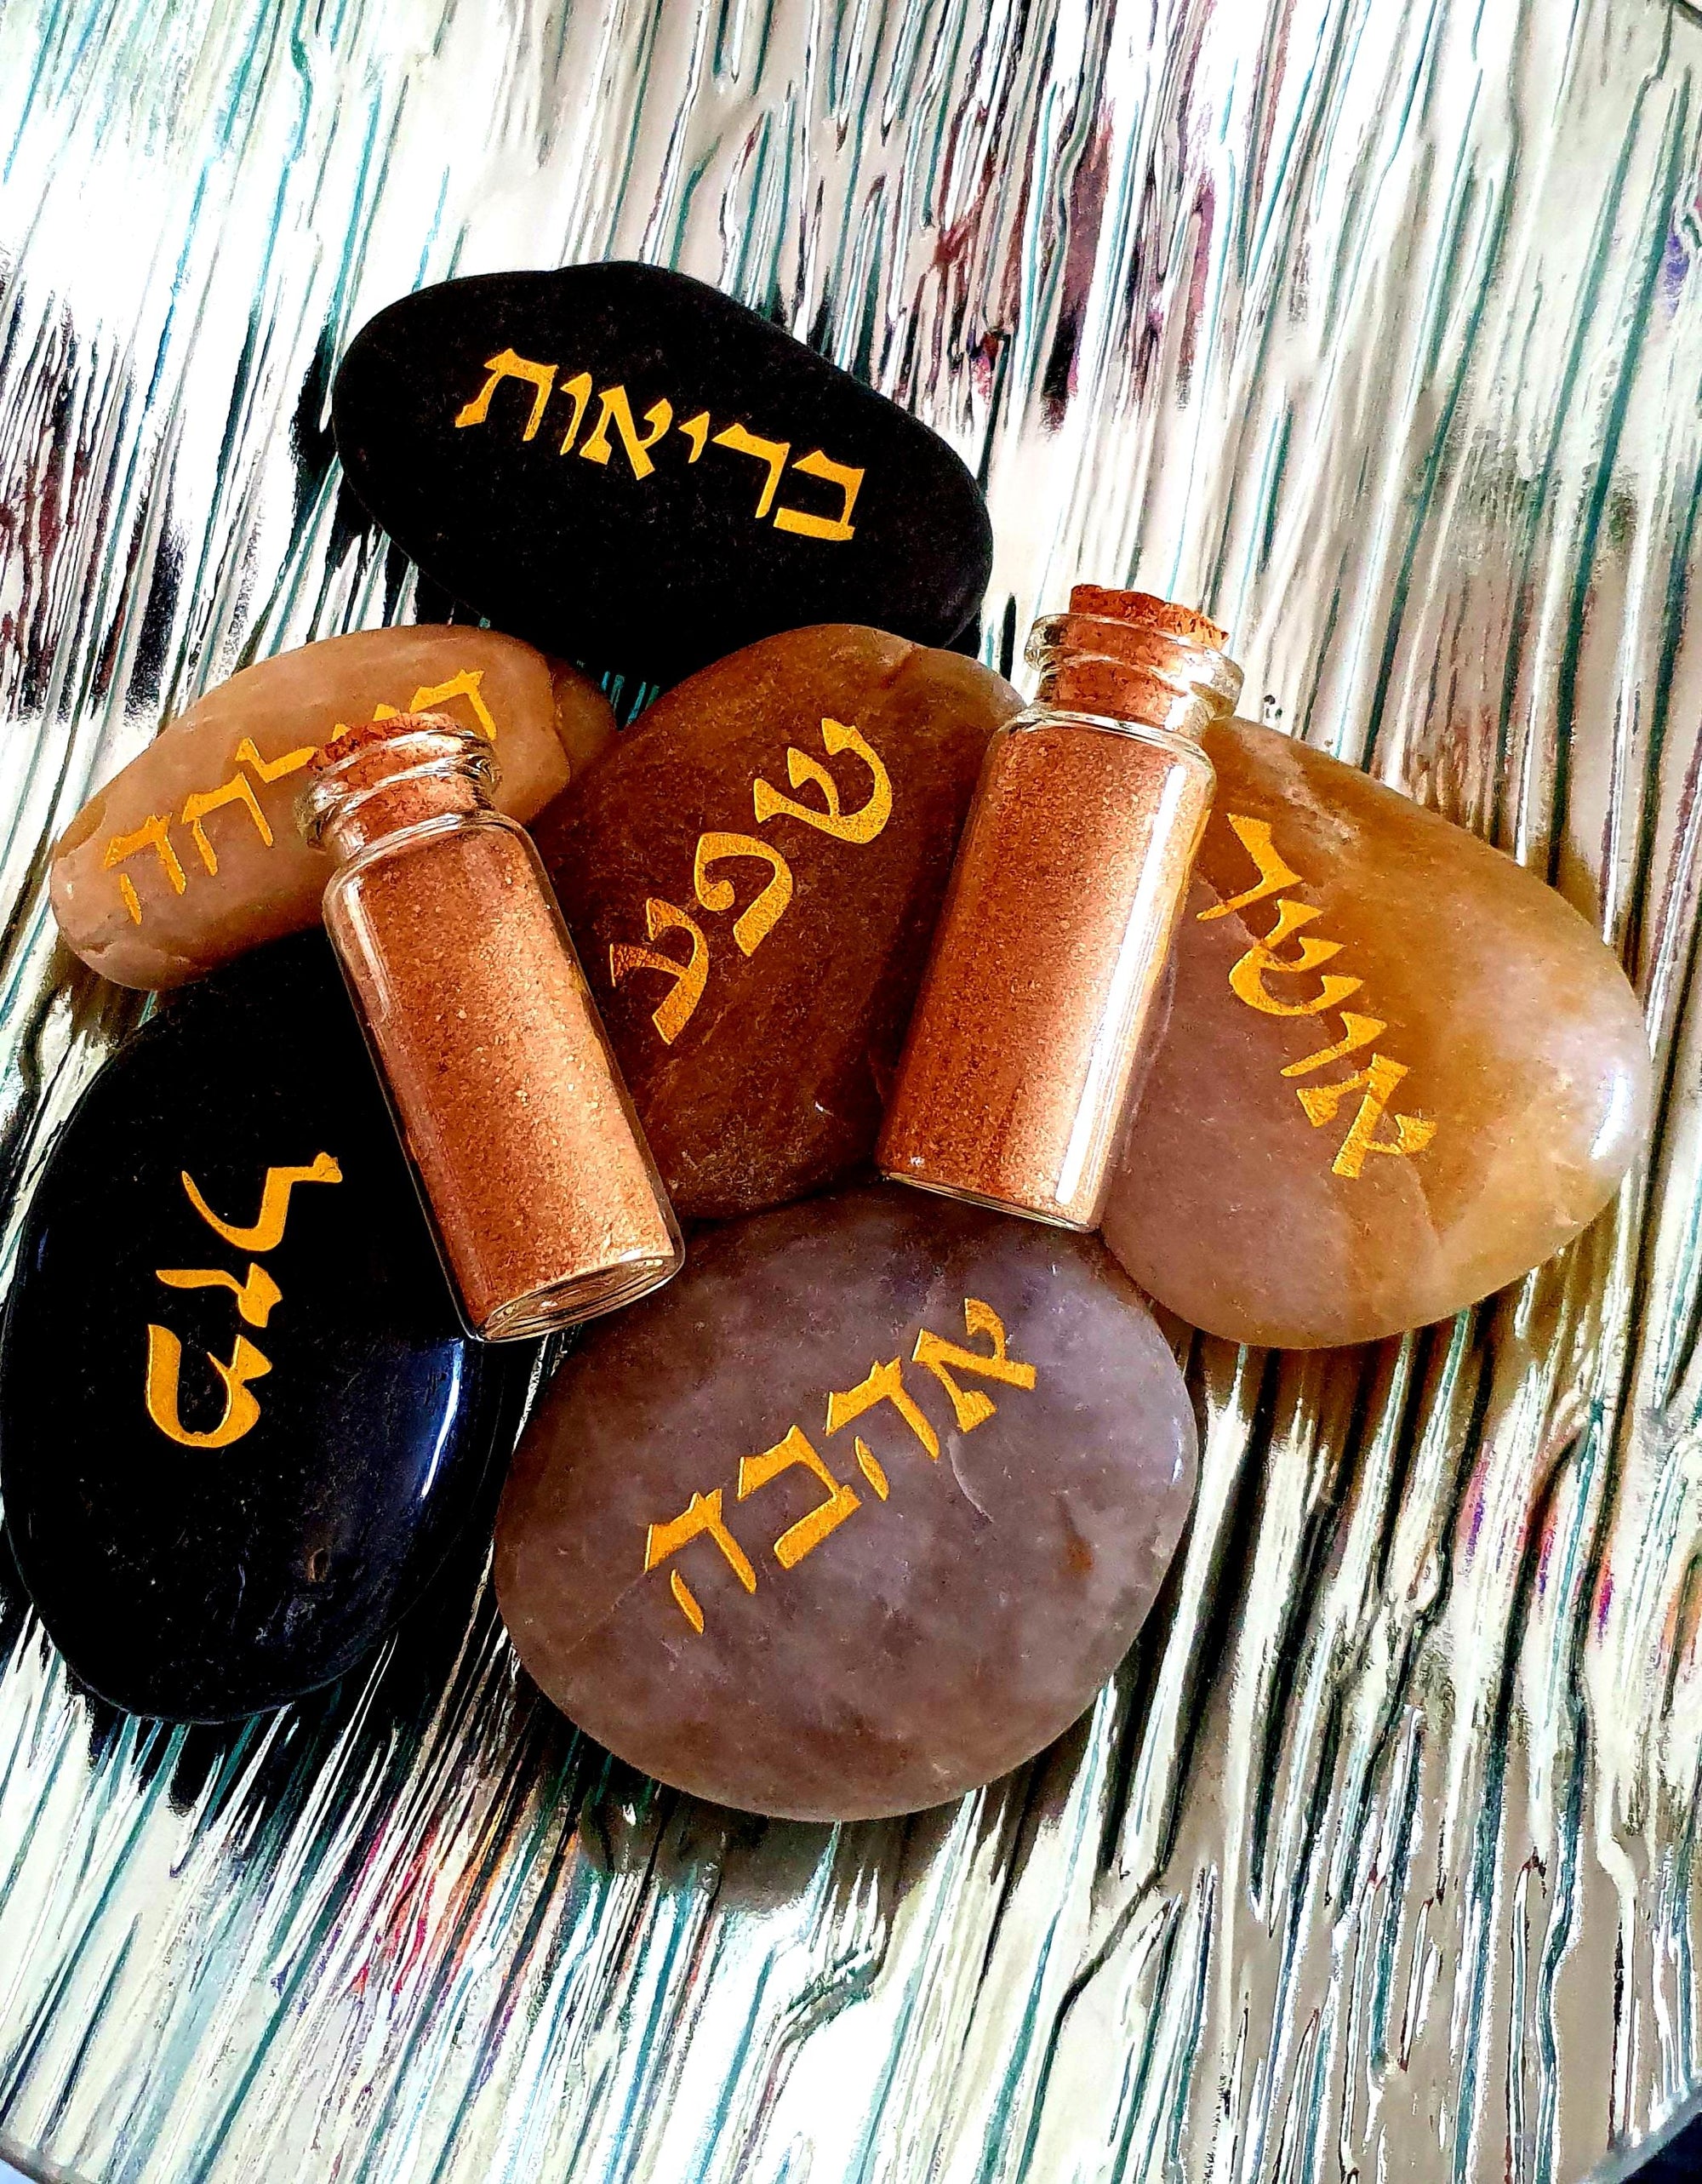 Sand from Israel in a bottle - have a memory from the Holy Land in your home!